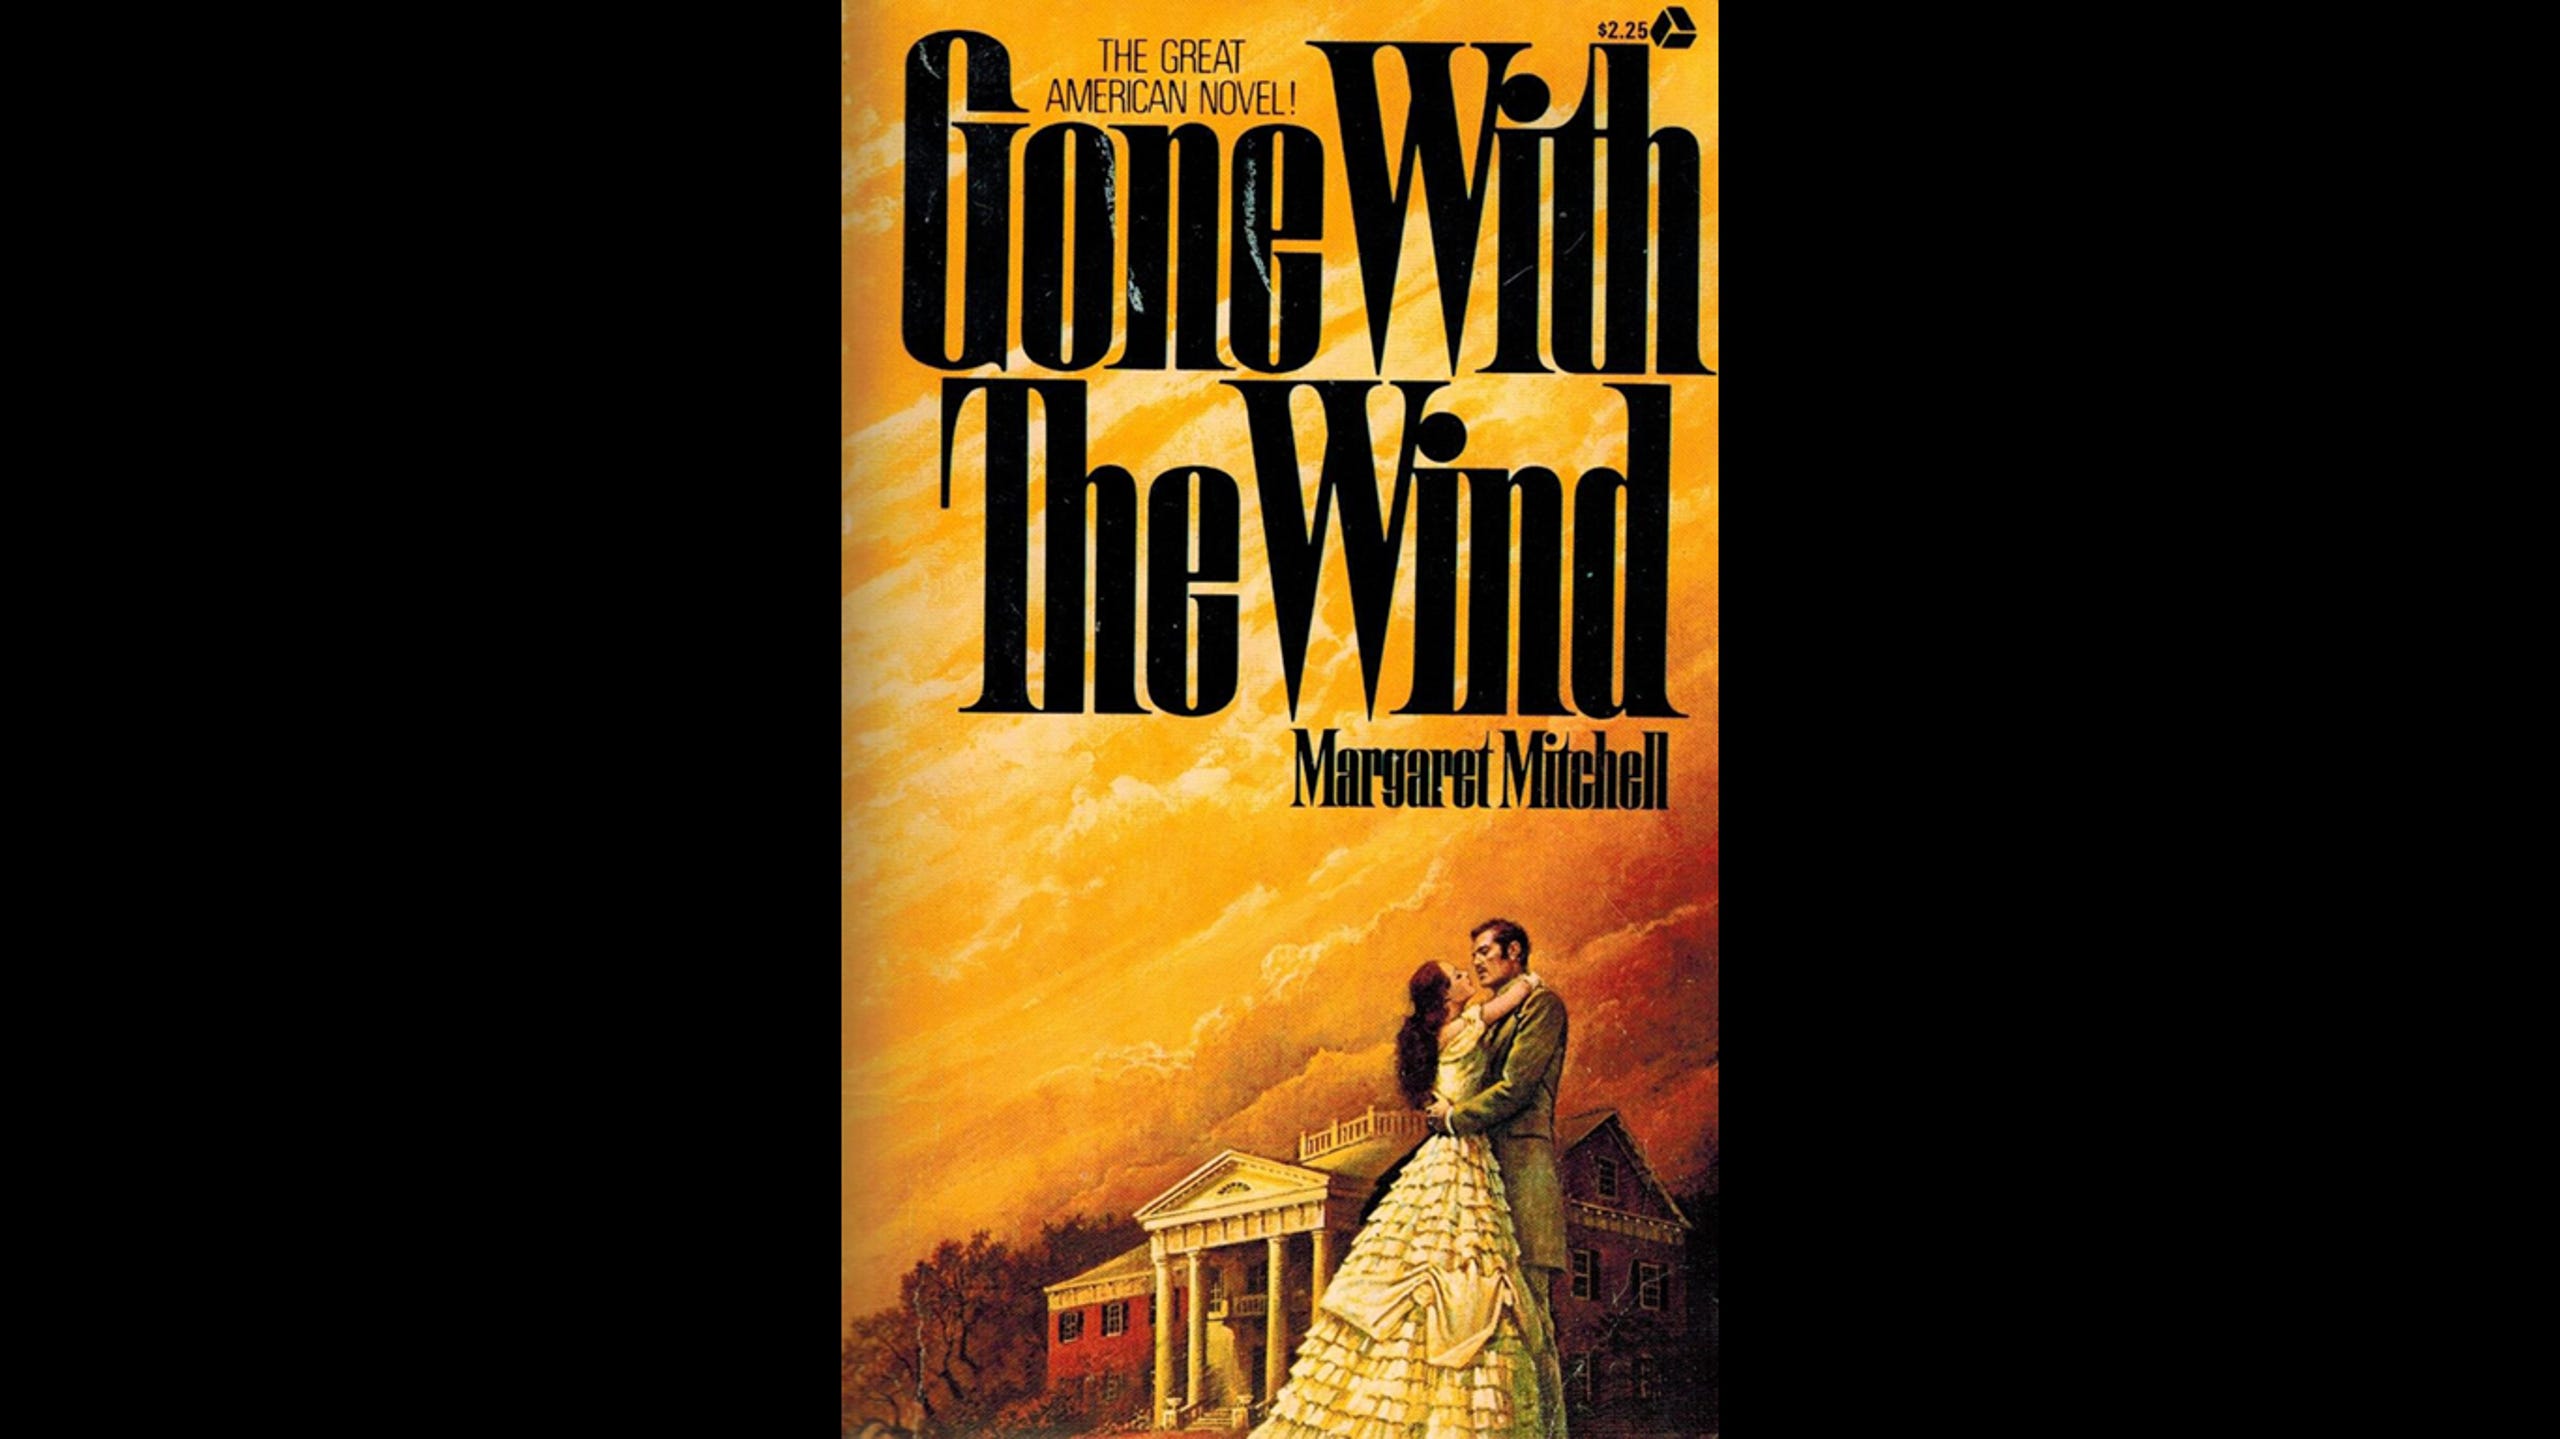 <strong>6. Gone with the Wind </strong><strong>• Author:</strong> Margaret Mitchell <strong>• Originally published in:</strong> 1936 <strong>• </strong>"Gone with the Wind" seems to be either loved or hated by people and other writers, and this is true even among English professors. "No need to perpetuate the moonlight and magnolias myth of slavery," Uruburu said. "It was a potboiler then and still is now." Hate it or love it, there is a lot that can be discussed about the good – and independent and determined modern woman, which was unusual at the time – and the bad, slavery and racism. Perhaps the mere fact that it's such a divisive novel – and so is the film – is enough reason to read it, and decide for yourself. The novel is loved by the older generation, according to Buster, and the movie only bolstered its popularity. "But I can see it falling by the wayside as the years unfold."